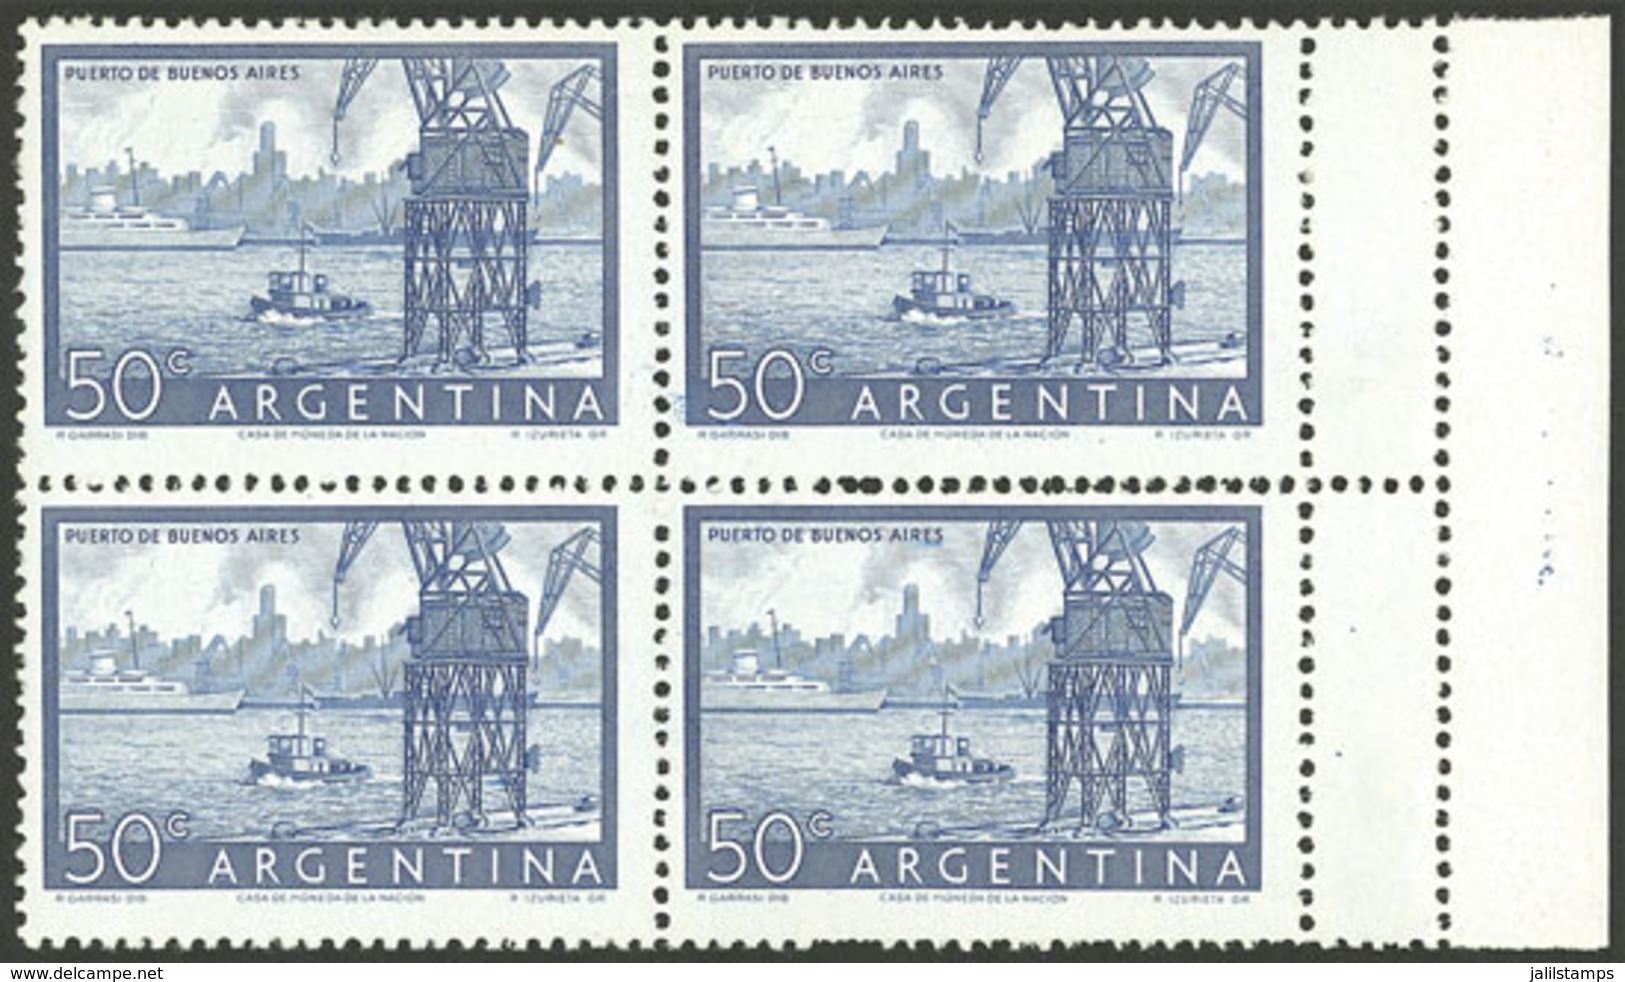 ARGENTINA: GJ.1042, 50c. Port Of Buenos Aires, Block Of 4 With DOUBLE PERFORATION At Right, Creating 2 Small Labels, VF  - Unused Stamps